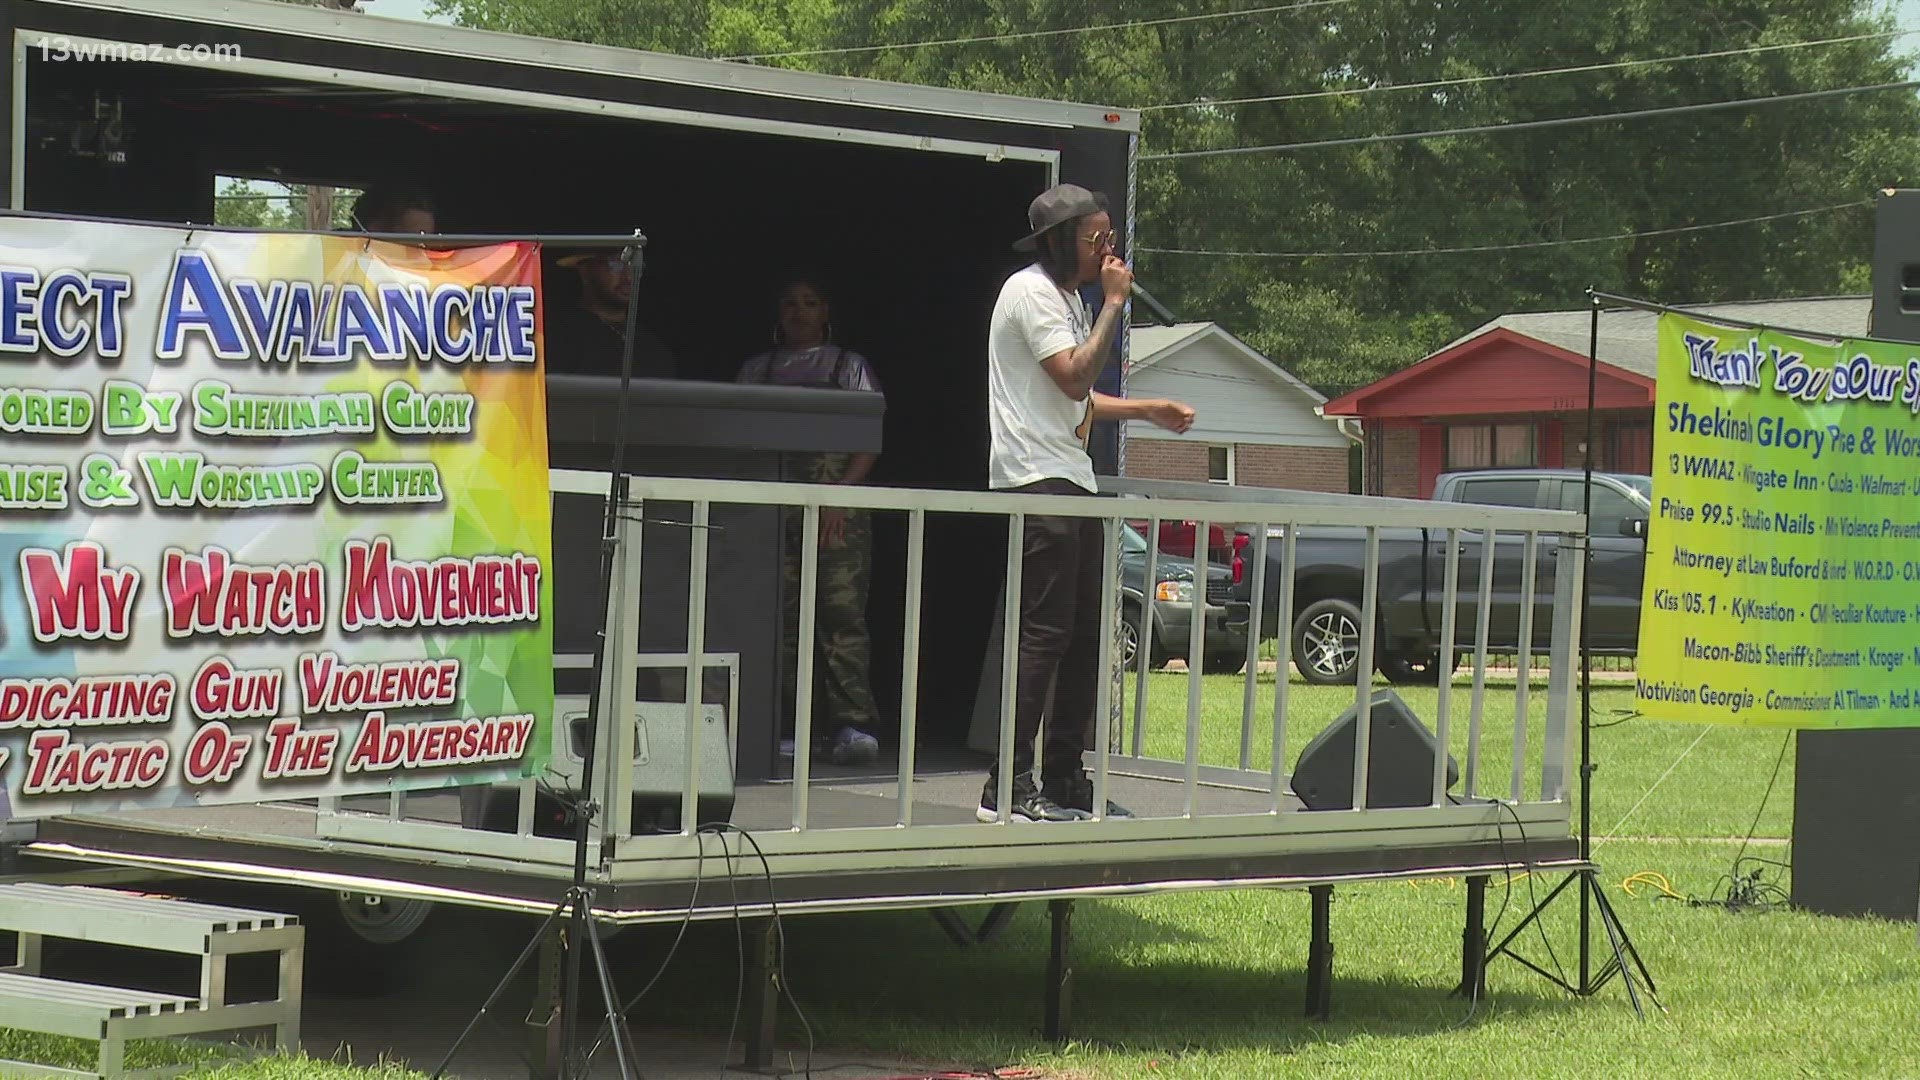 The group 'Project Avalanche' sponsored the event, aimed at addressing youth violence and gun violence in Bibb County.